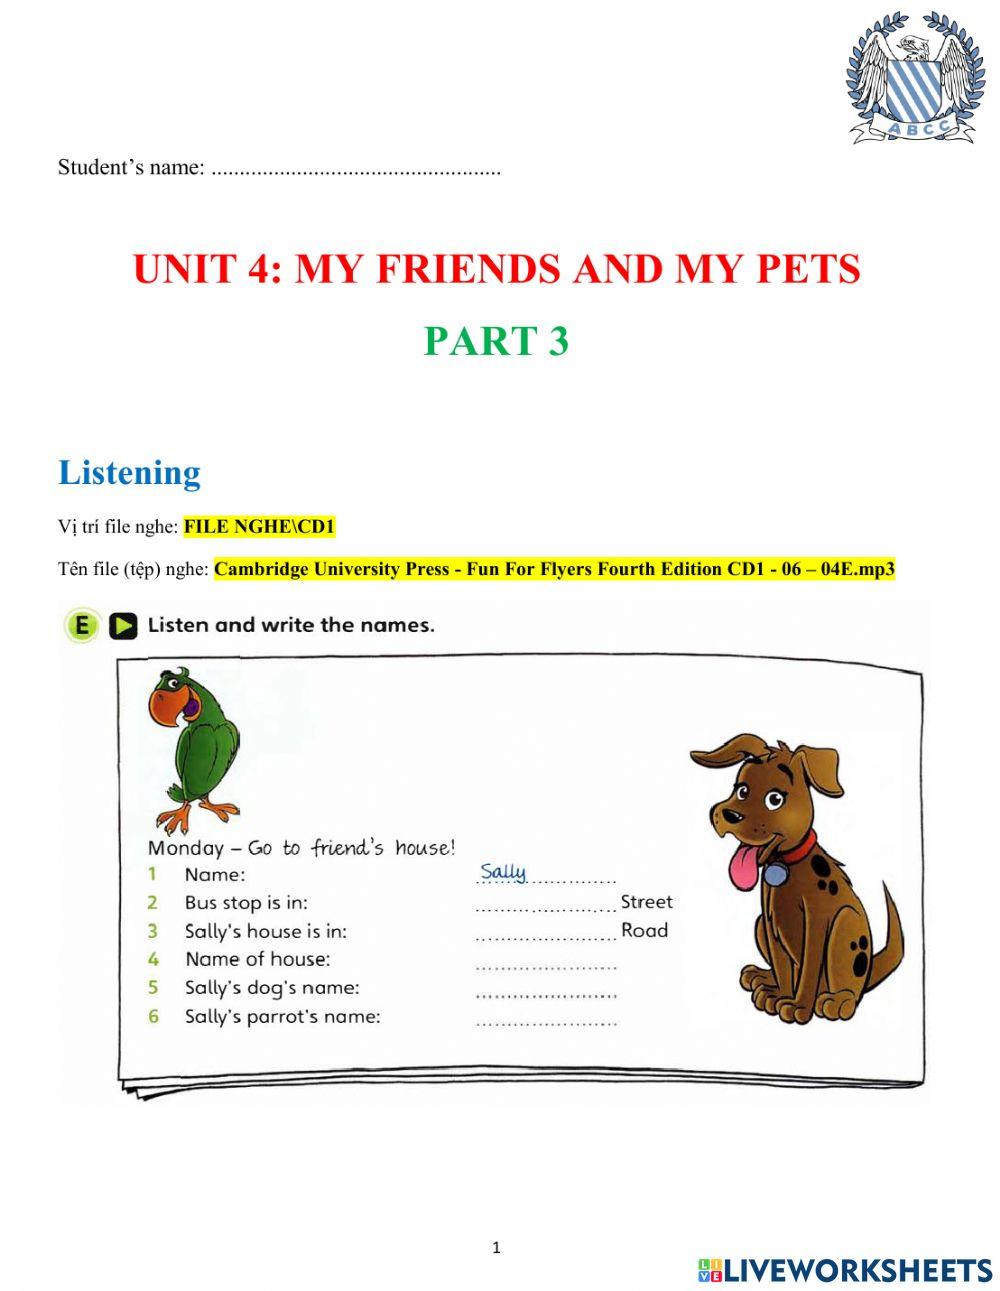 My friends and my pets - Part 3